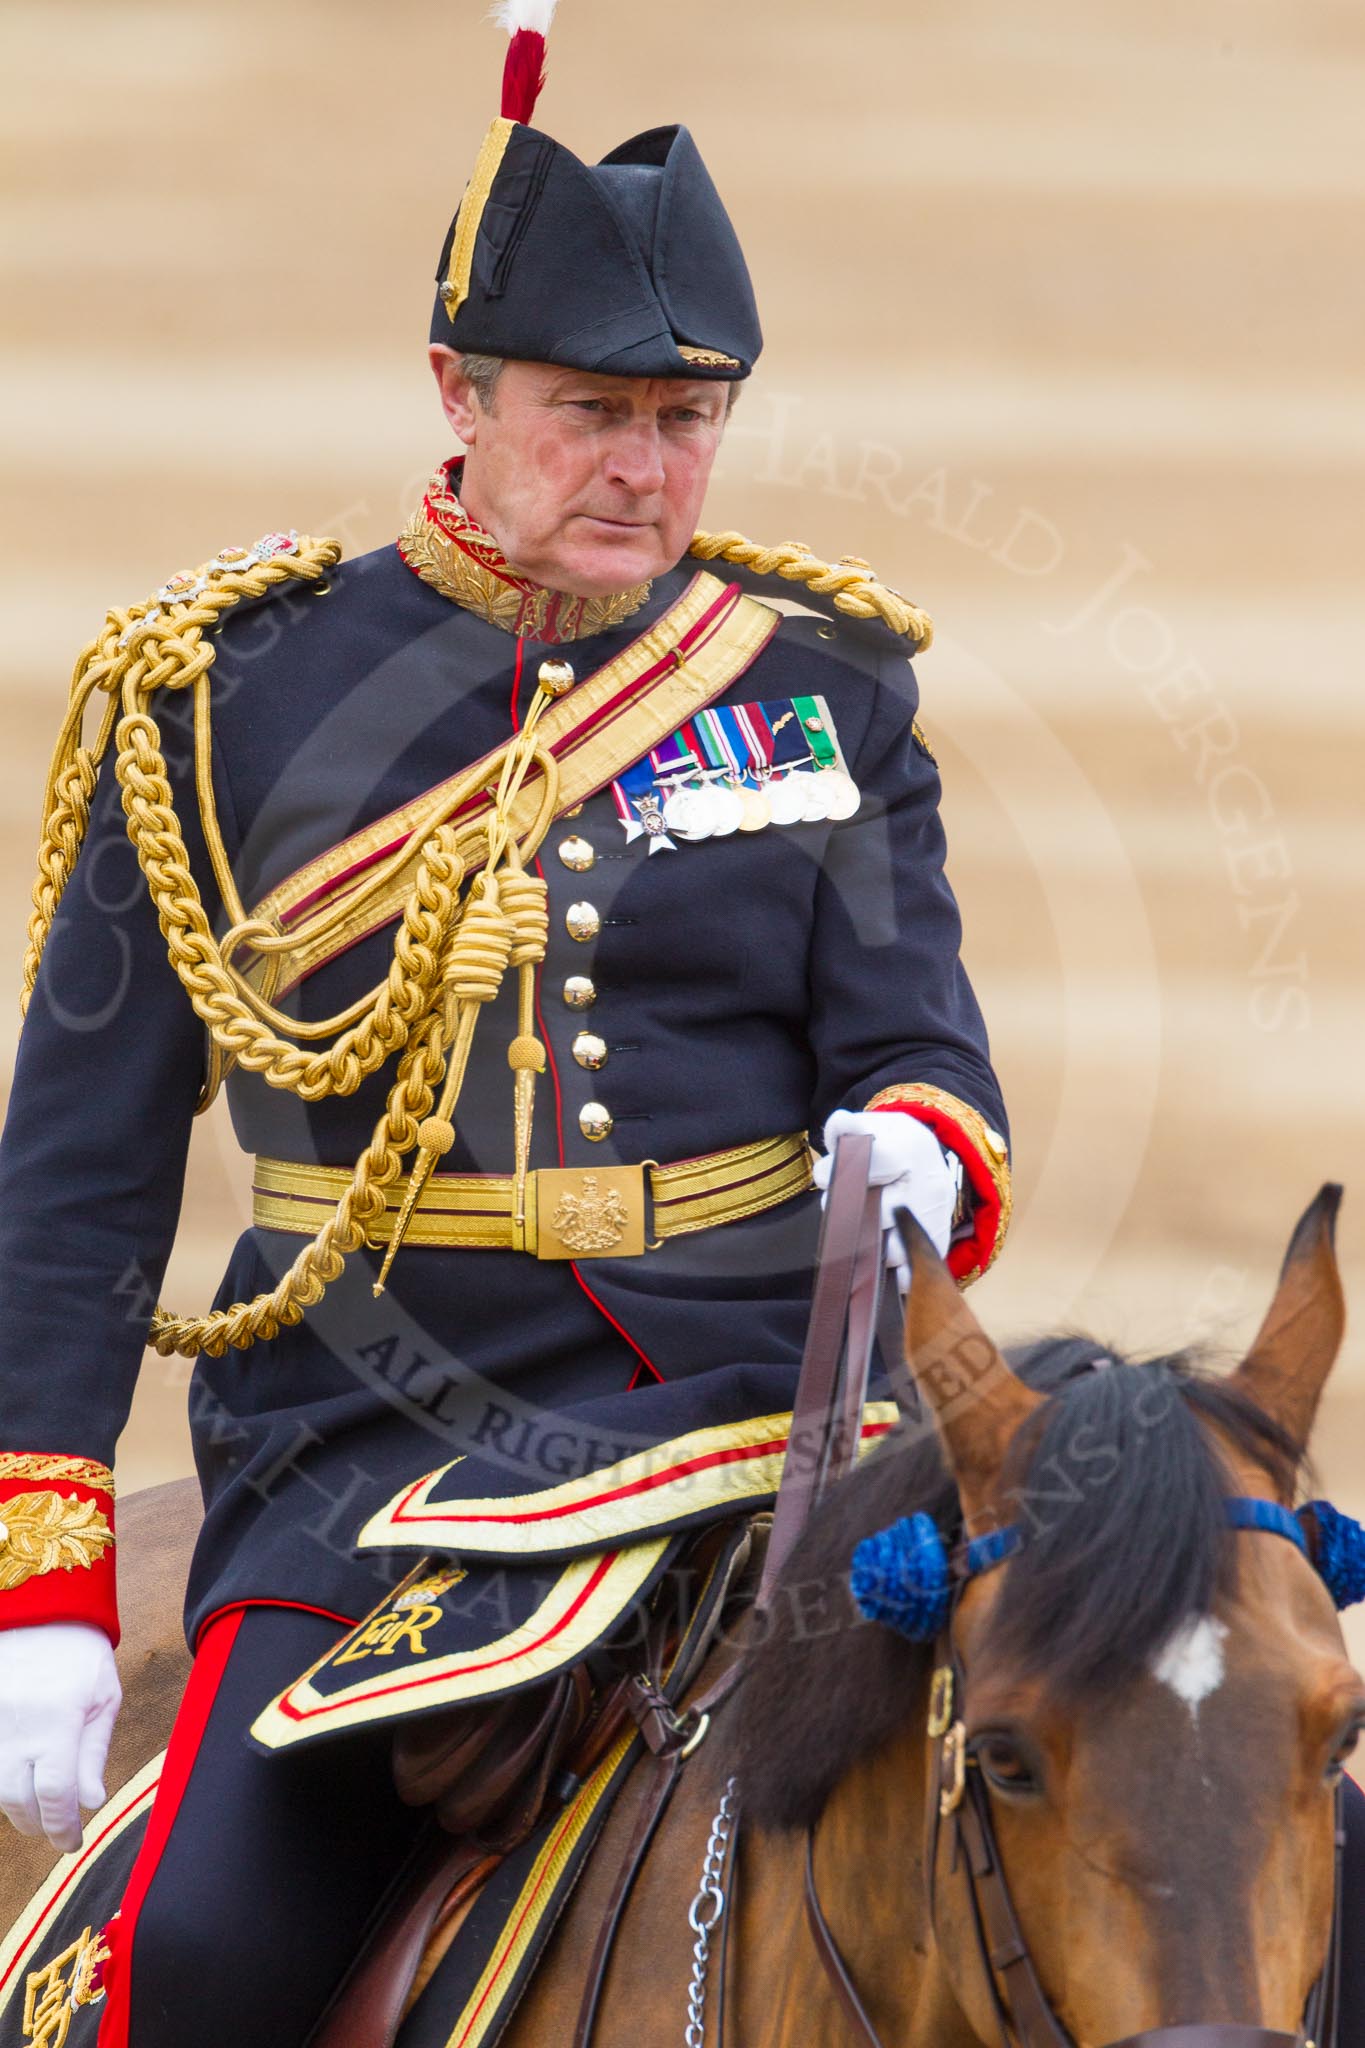 The Colonel's Review 2016.
Horse Guards Parade, Westminster,
London,

United Kingdom,
on 04 June 2016 at 11:06, image #214